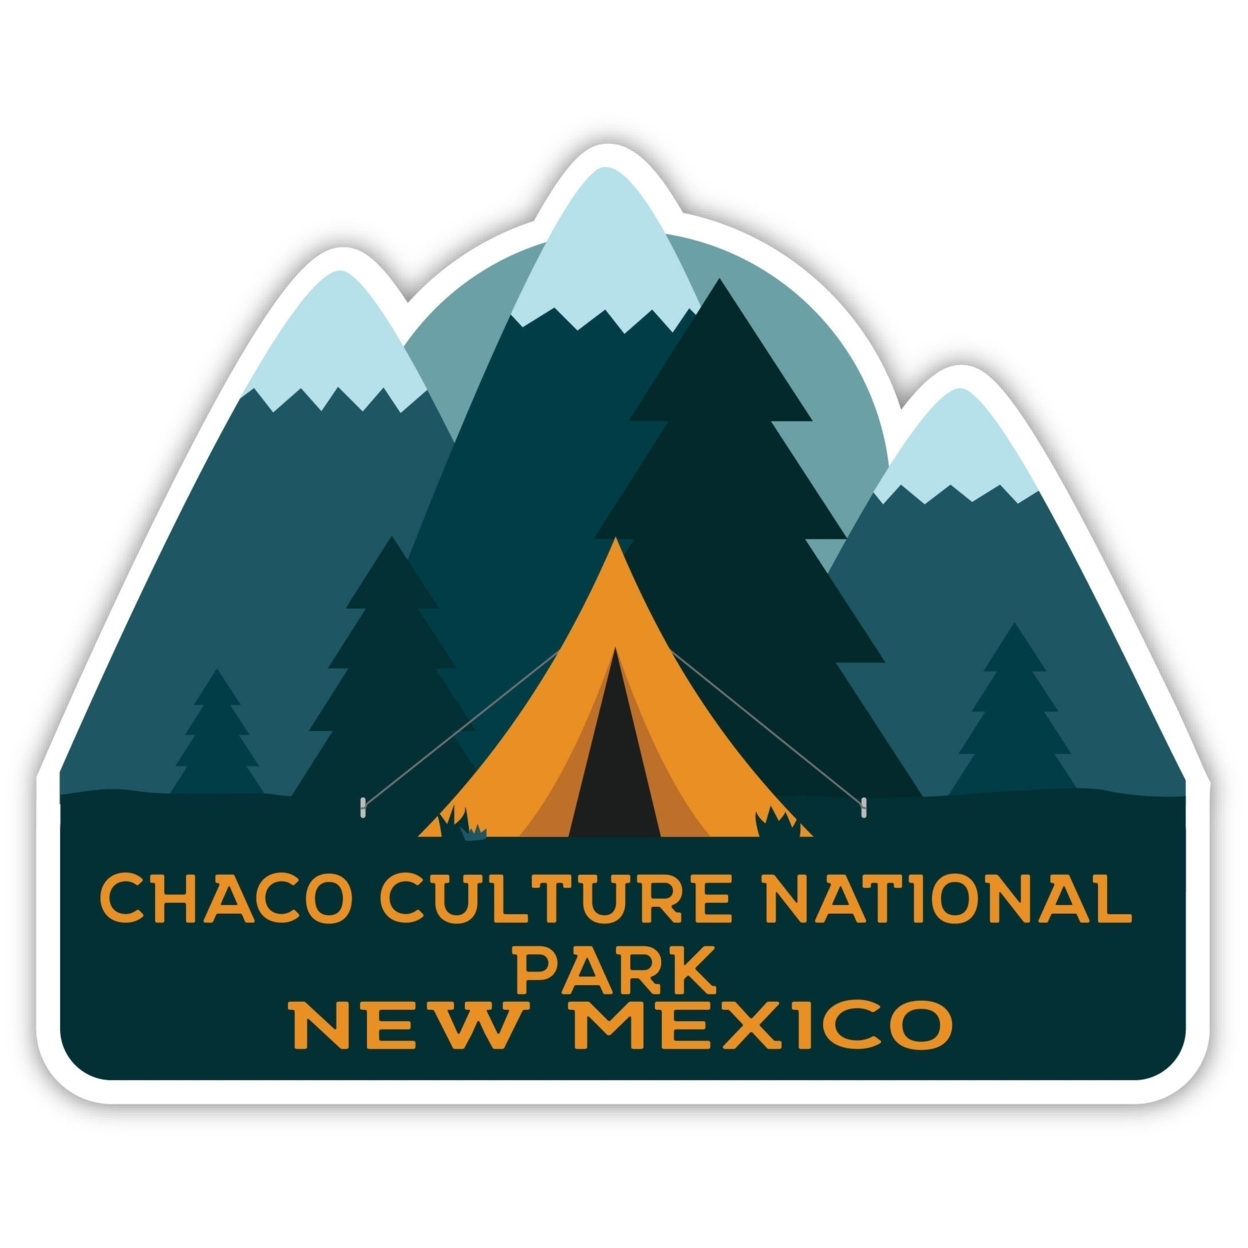 Chaco Culture National Park New Mexico Souvenir Decorative Stickers (Choose Theme And Size) - 4-Pack, 12-Inch, Tent